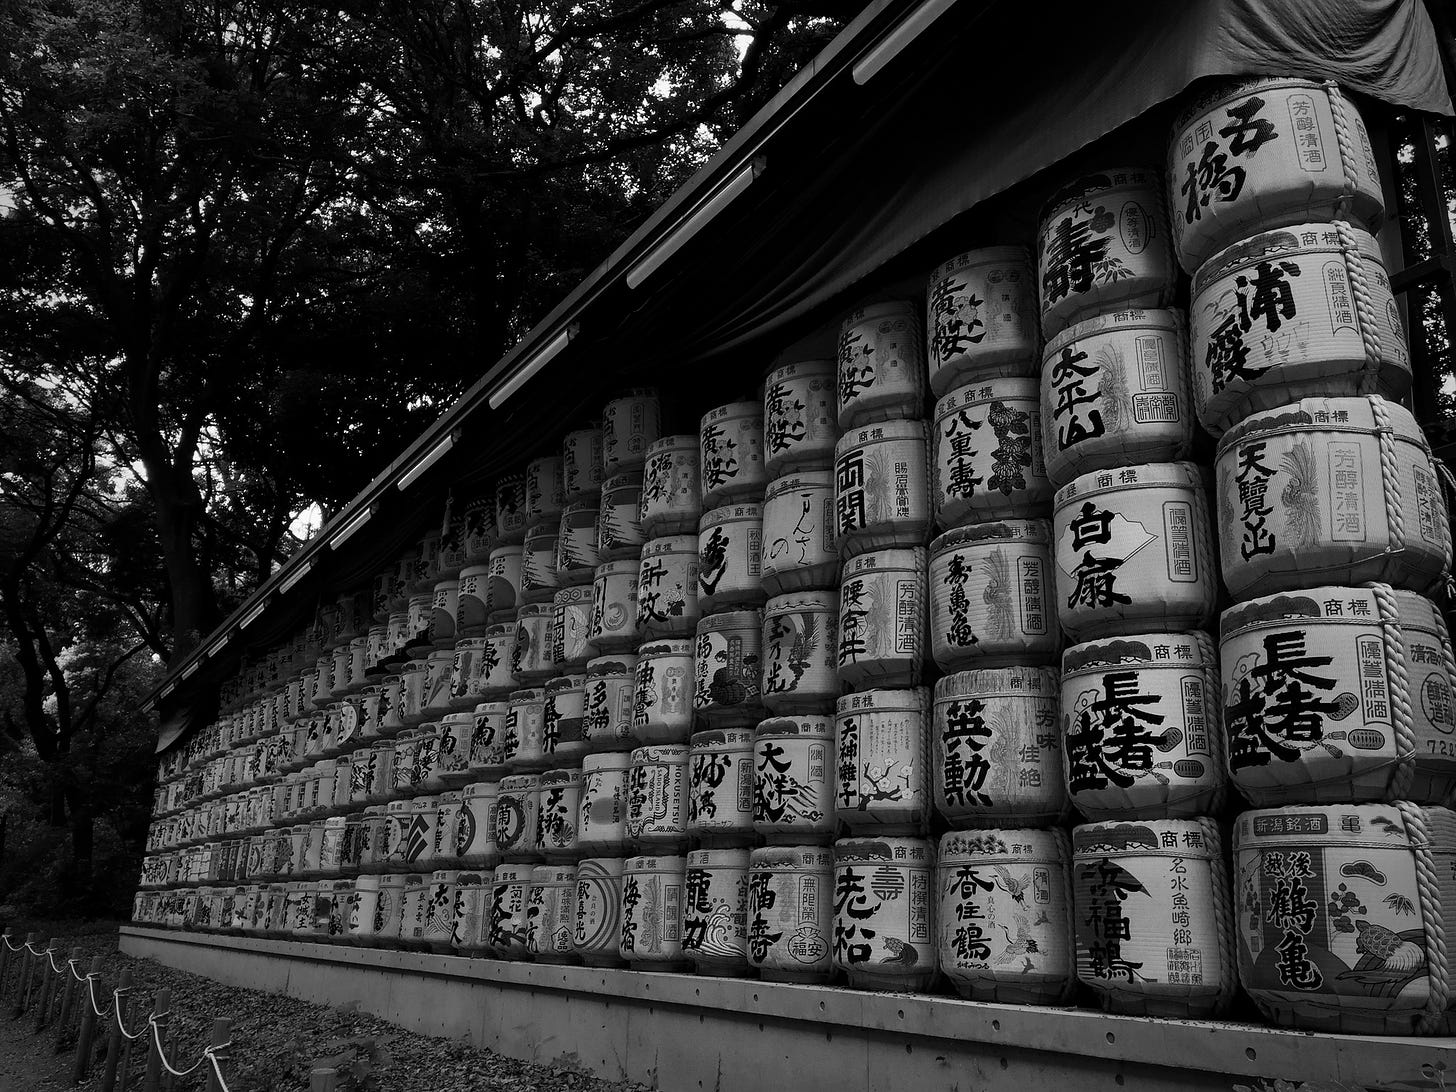 black and white photo of the rice barrels at the Meiji garden and shrine, Tokyo Japan)